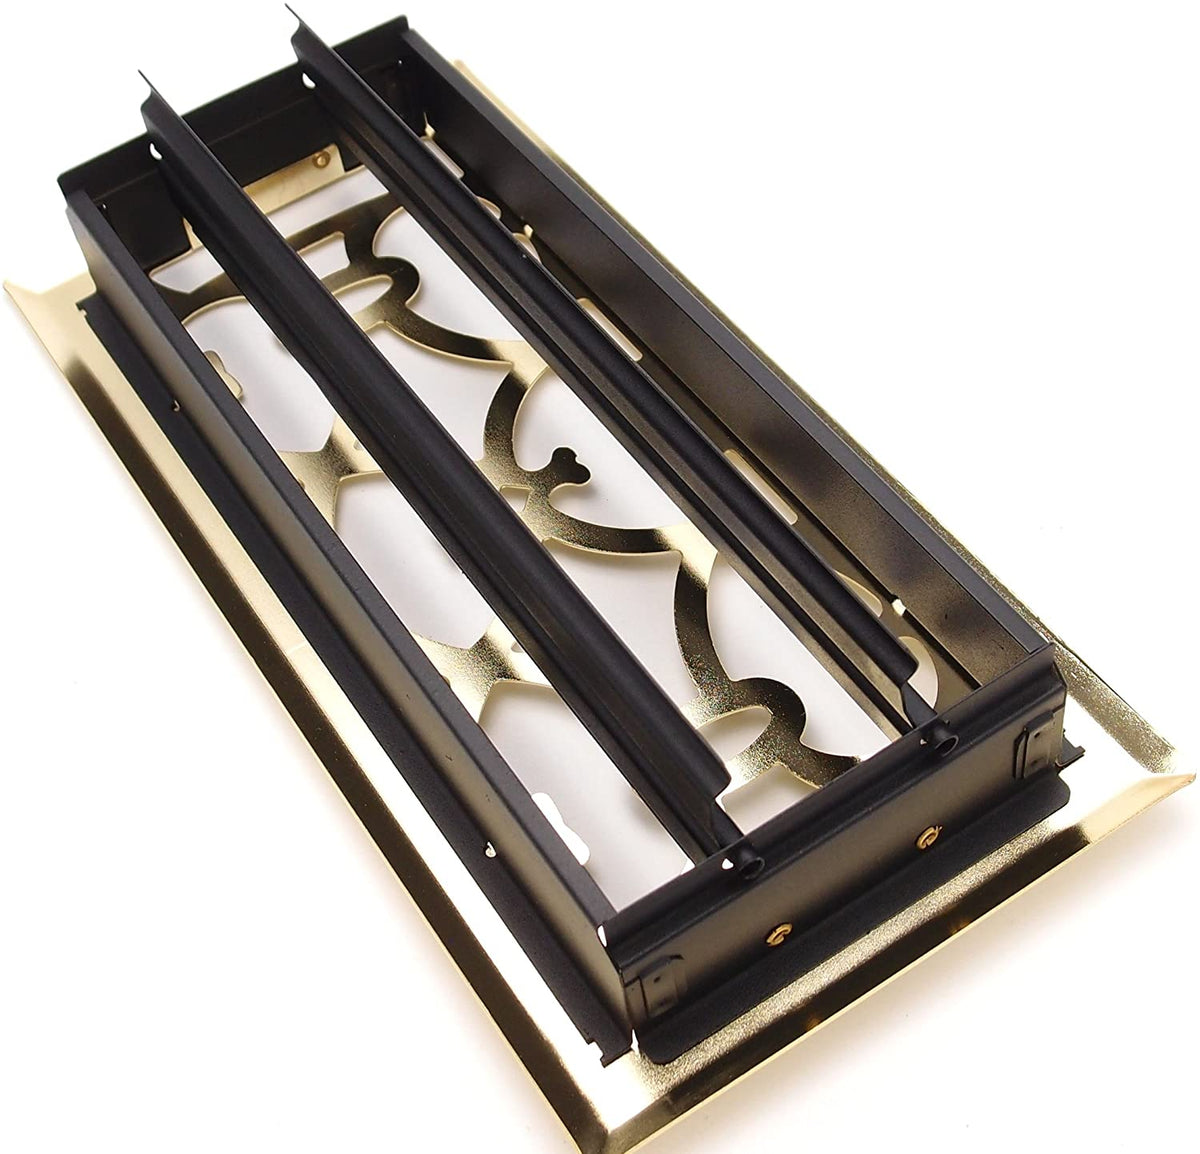 4&quot; X 10&quot; Modern Victorian Floor Register Grille With Dampers - Decorative Grate - HVAC Vent Duct Cover - Polished Brass